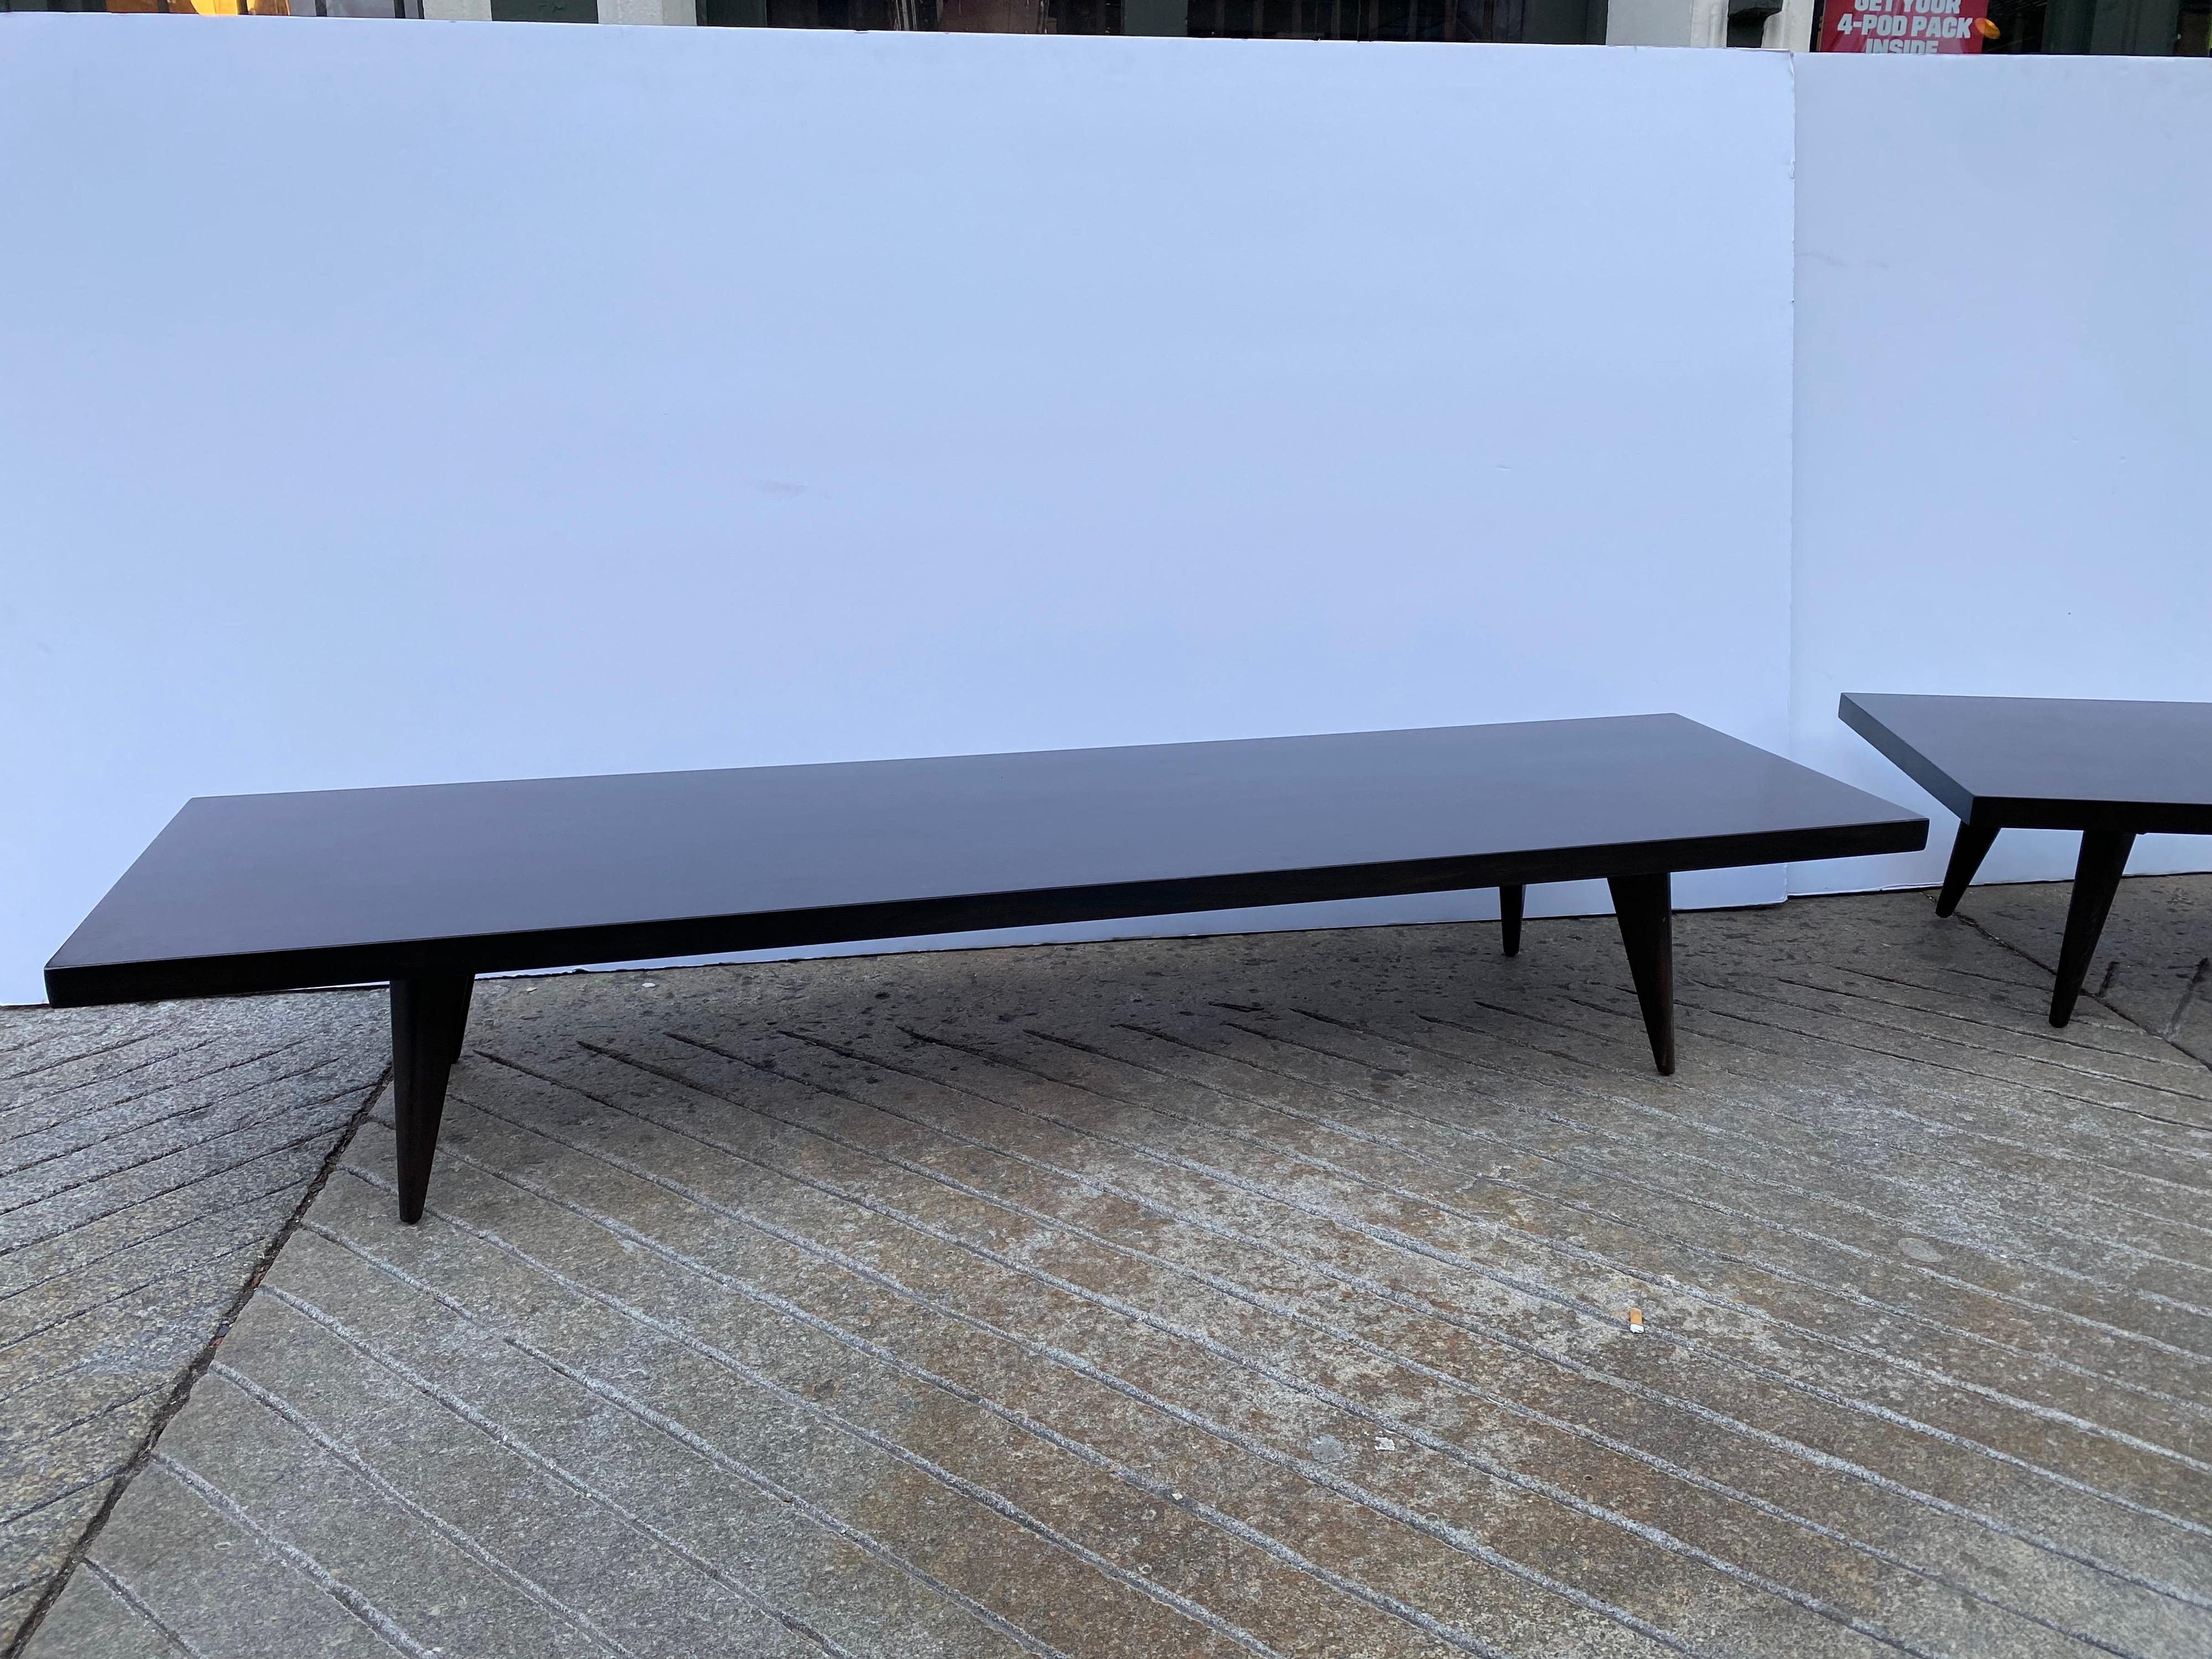 Pair of low sleek tables or benches. Measures: Large one: D: 20 W: 74 H: 12 smaller one: D: 20 W: 53 H:12. Perfect to use with low windows! Can be set up in a corner or used straight. Recently refinished in a dark walnut finish. Legs splay out at a